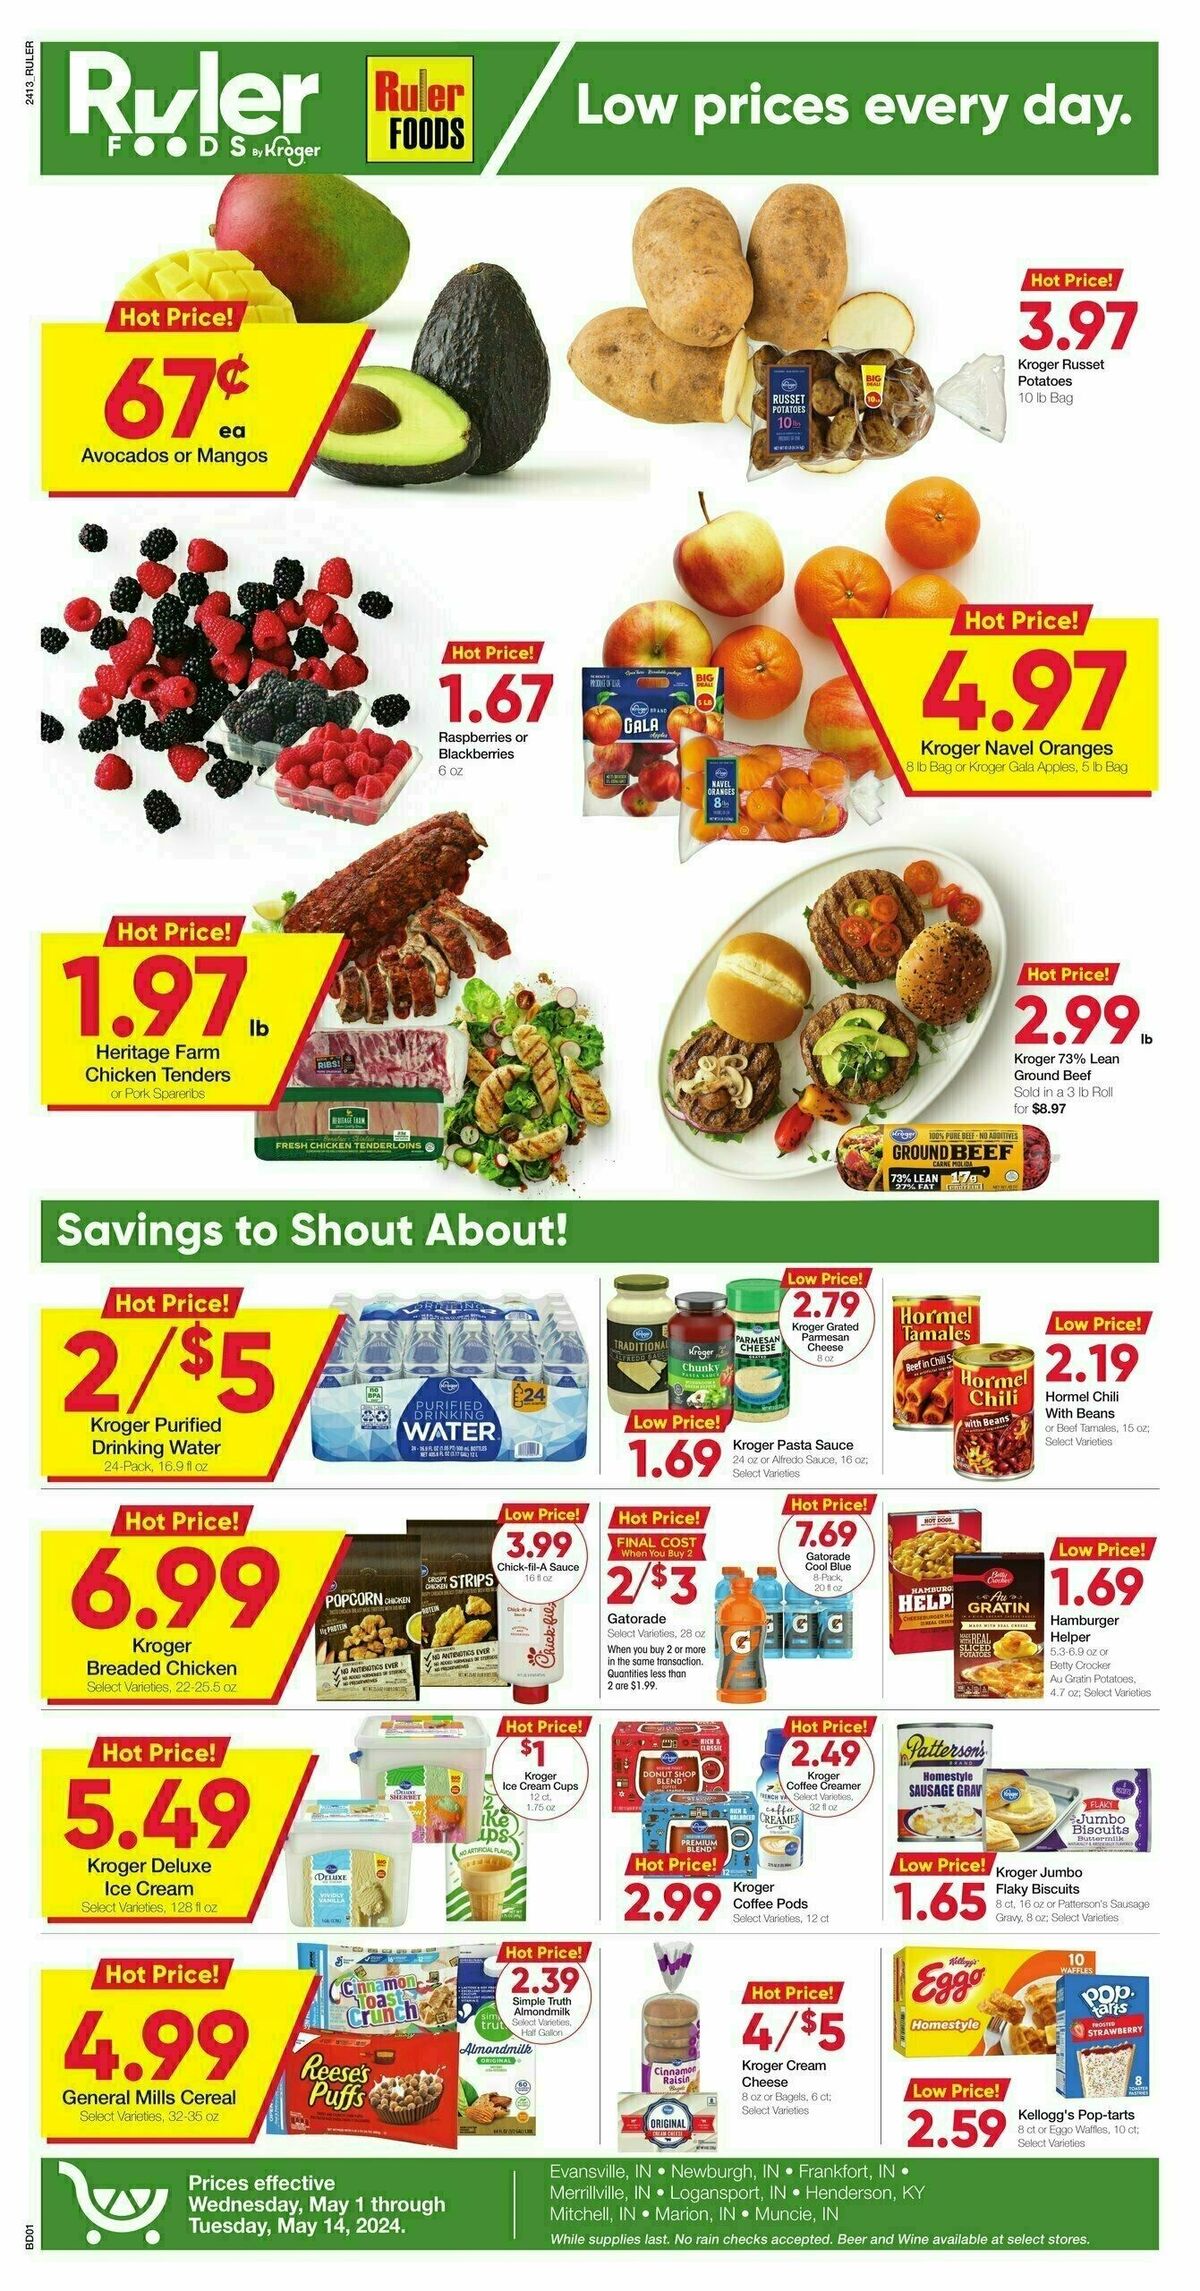 Ruler Foods Weekly Ad from May 1